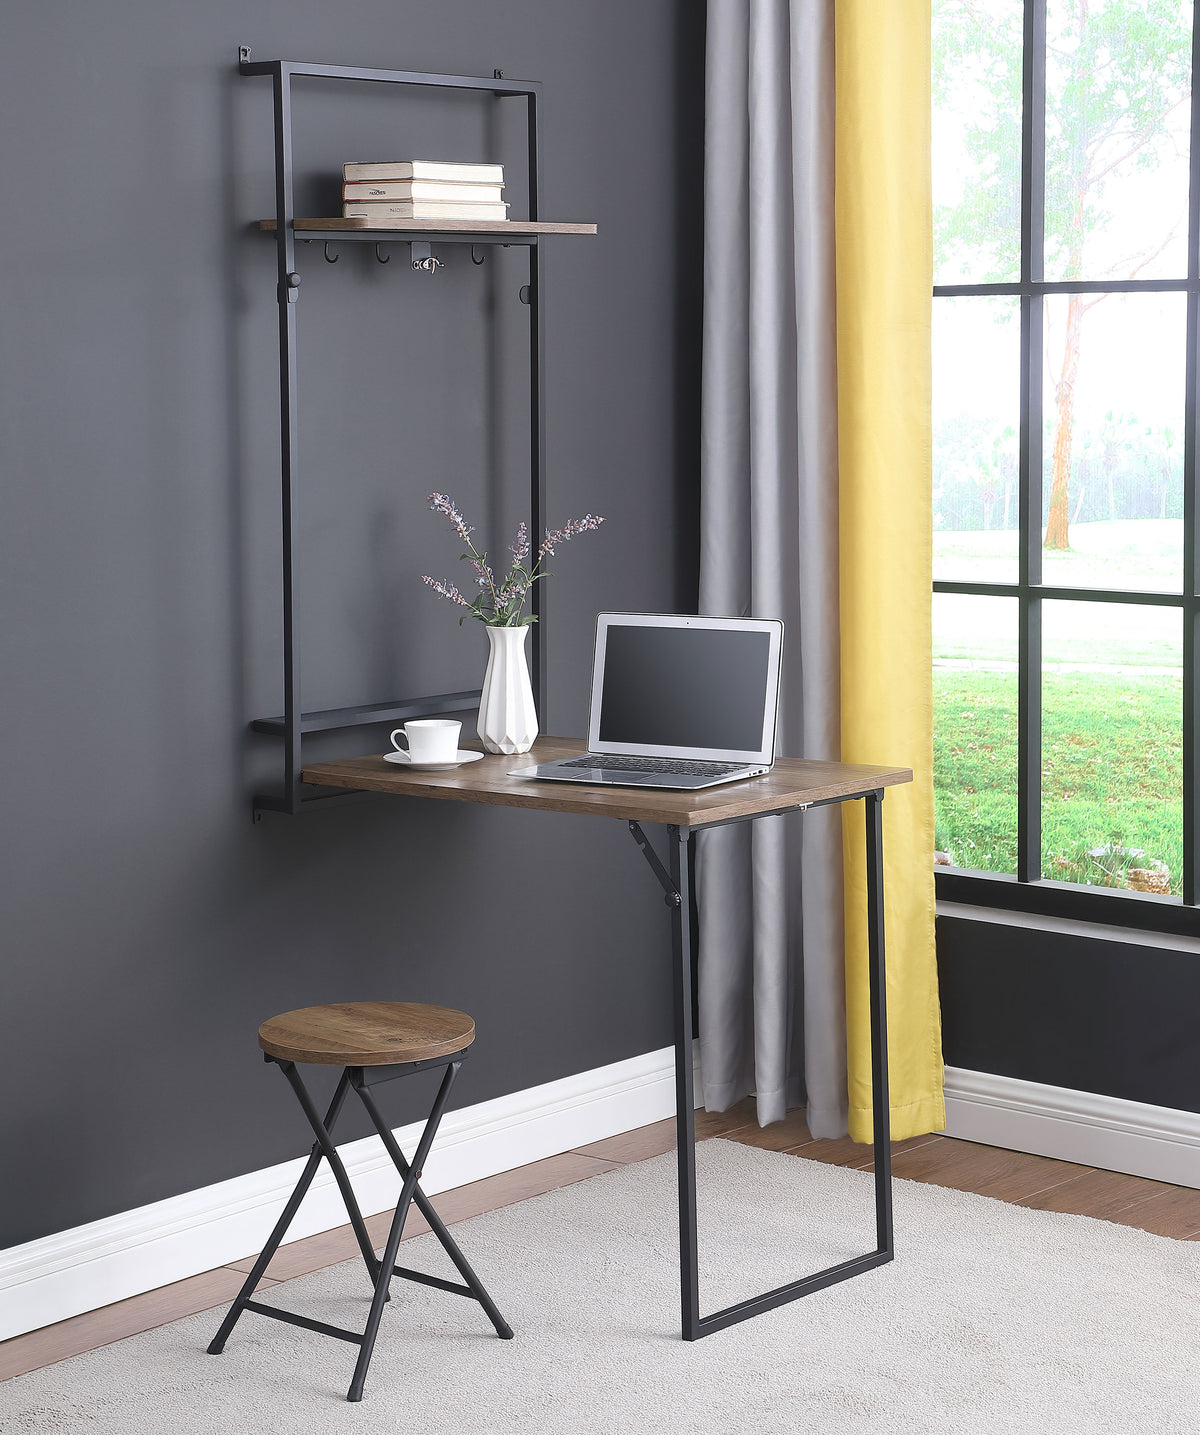 Riley Foldable Wall Desk with Stool Rustic Oak and Sandy Black  Las Vegas Furniture Stores